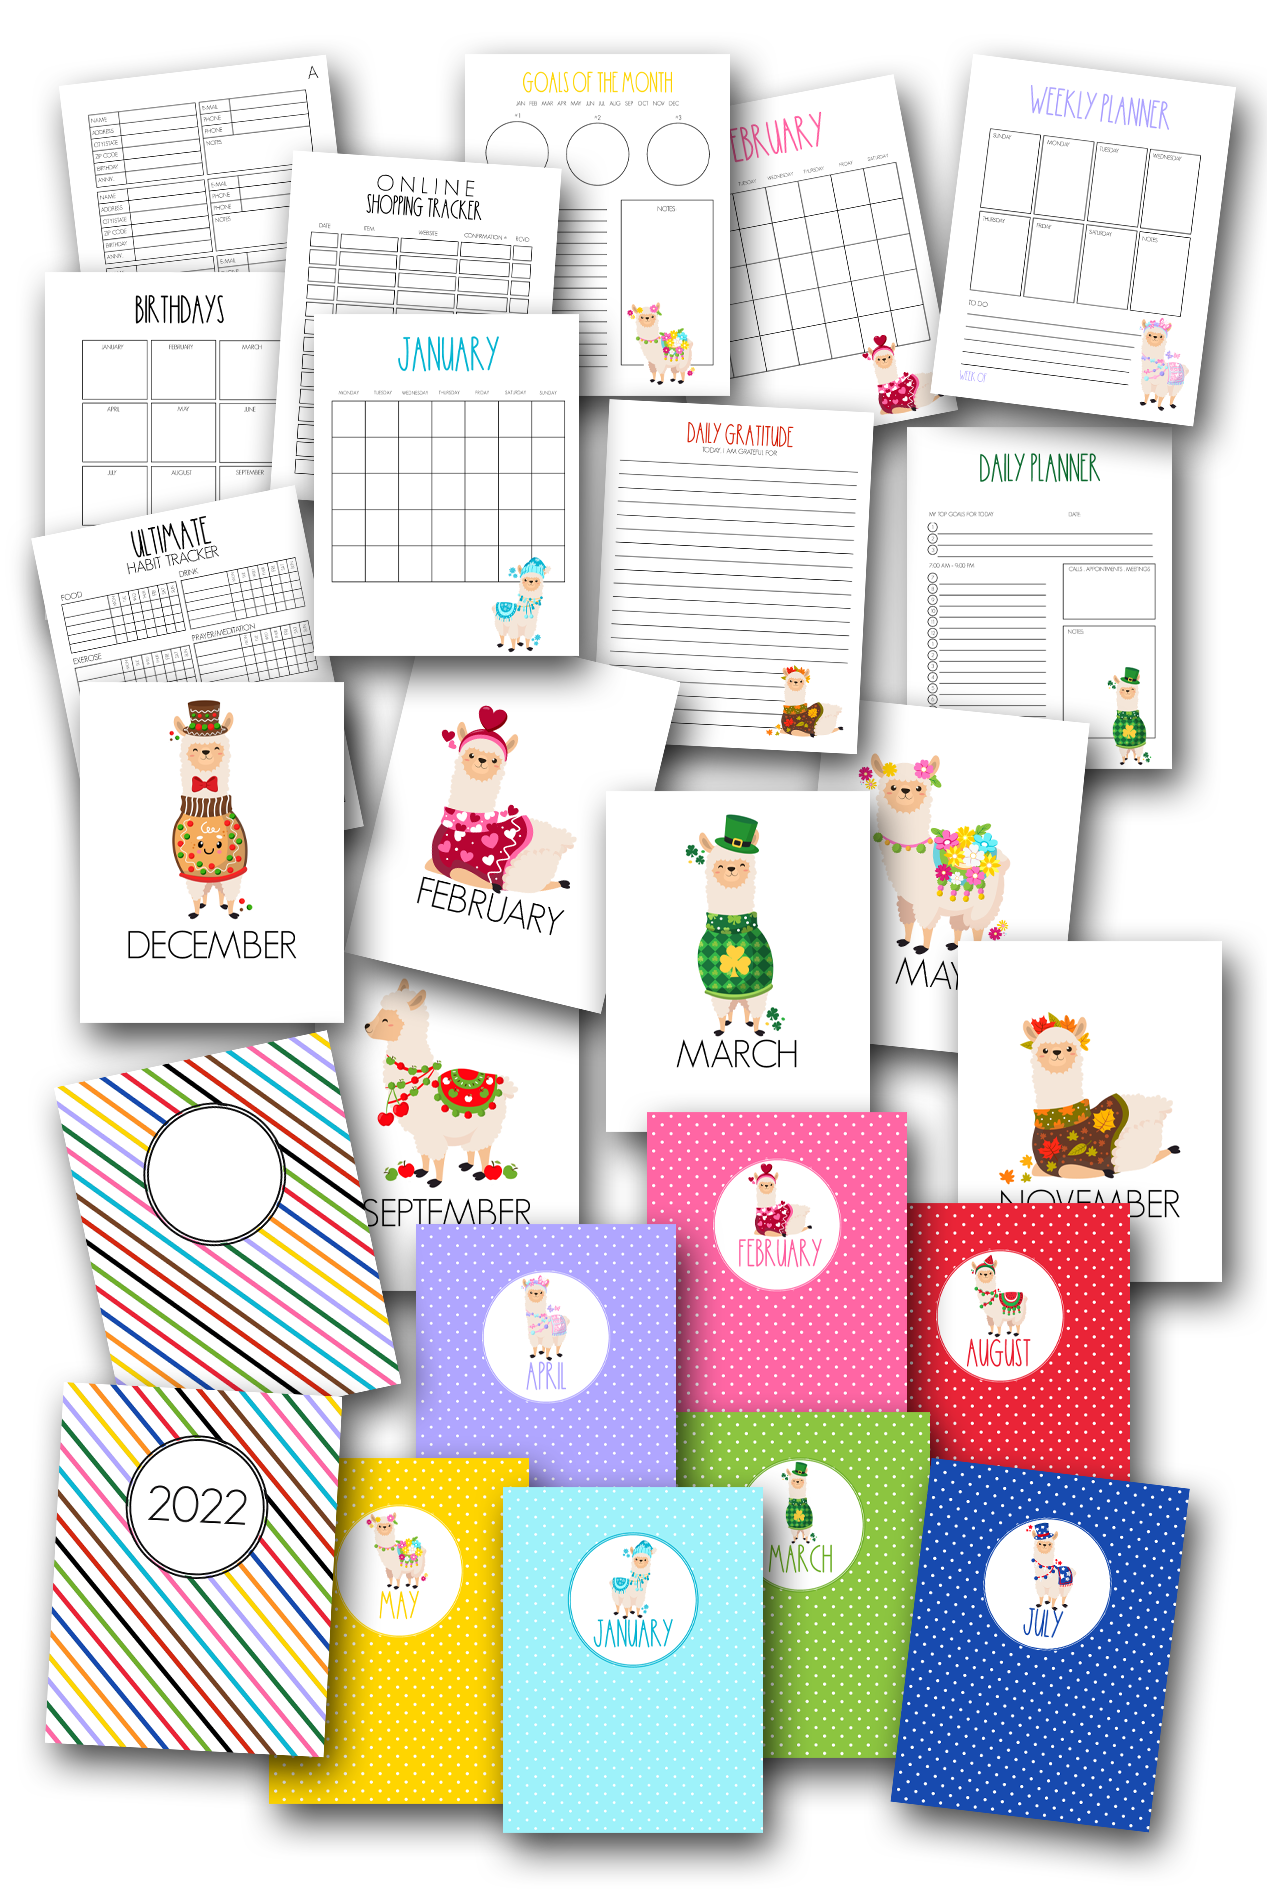 Year of the Llama Home Organization Planner Journal